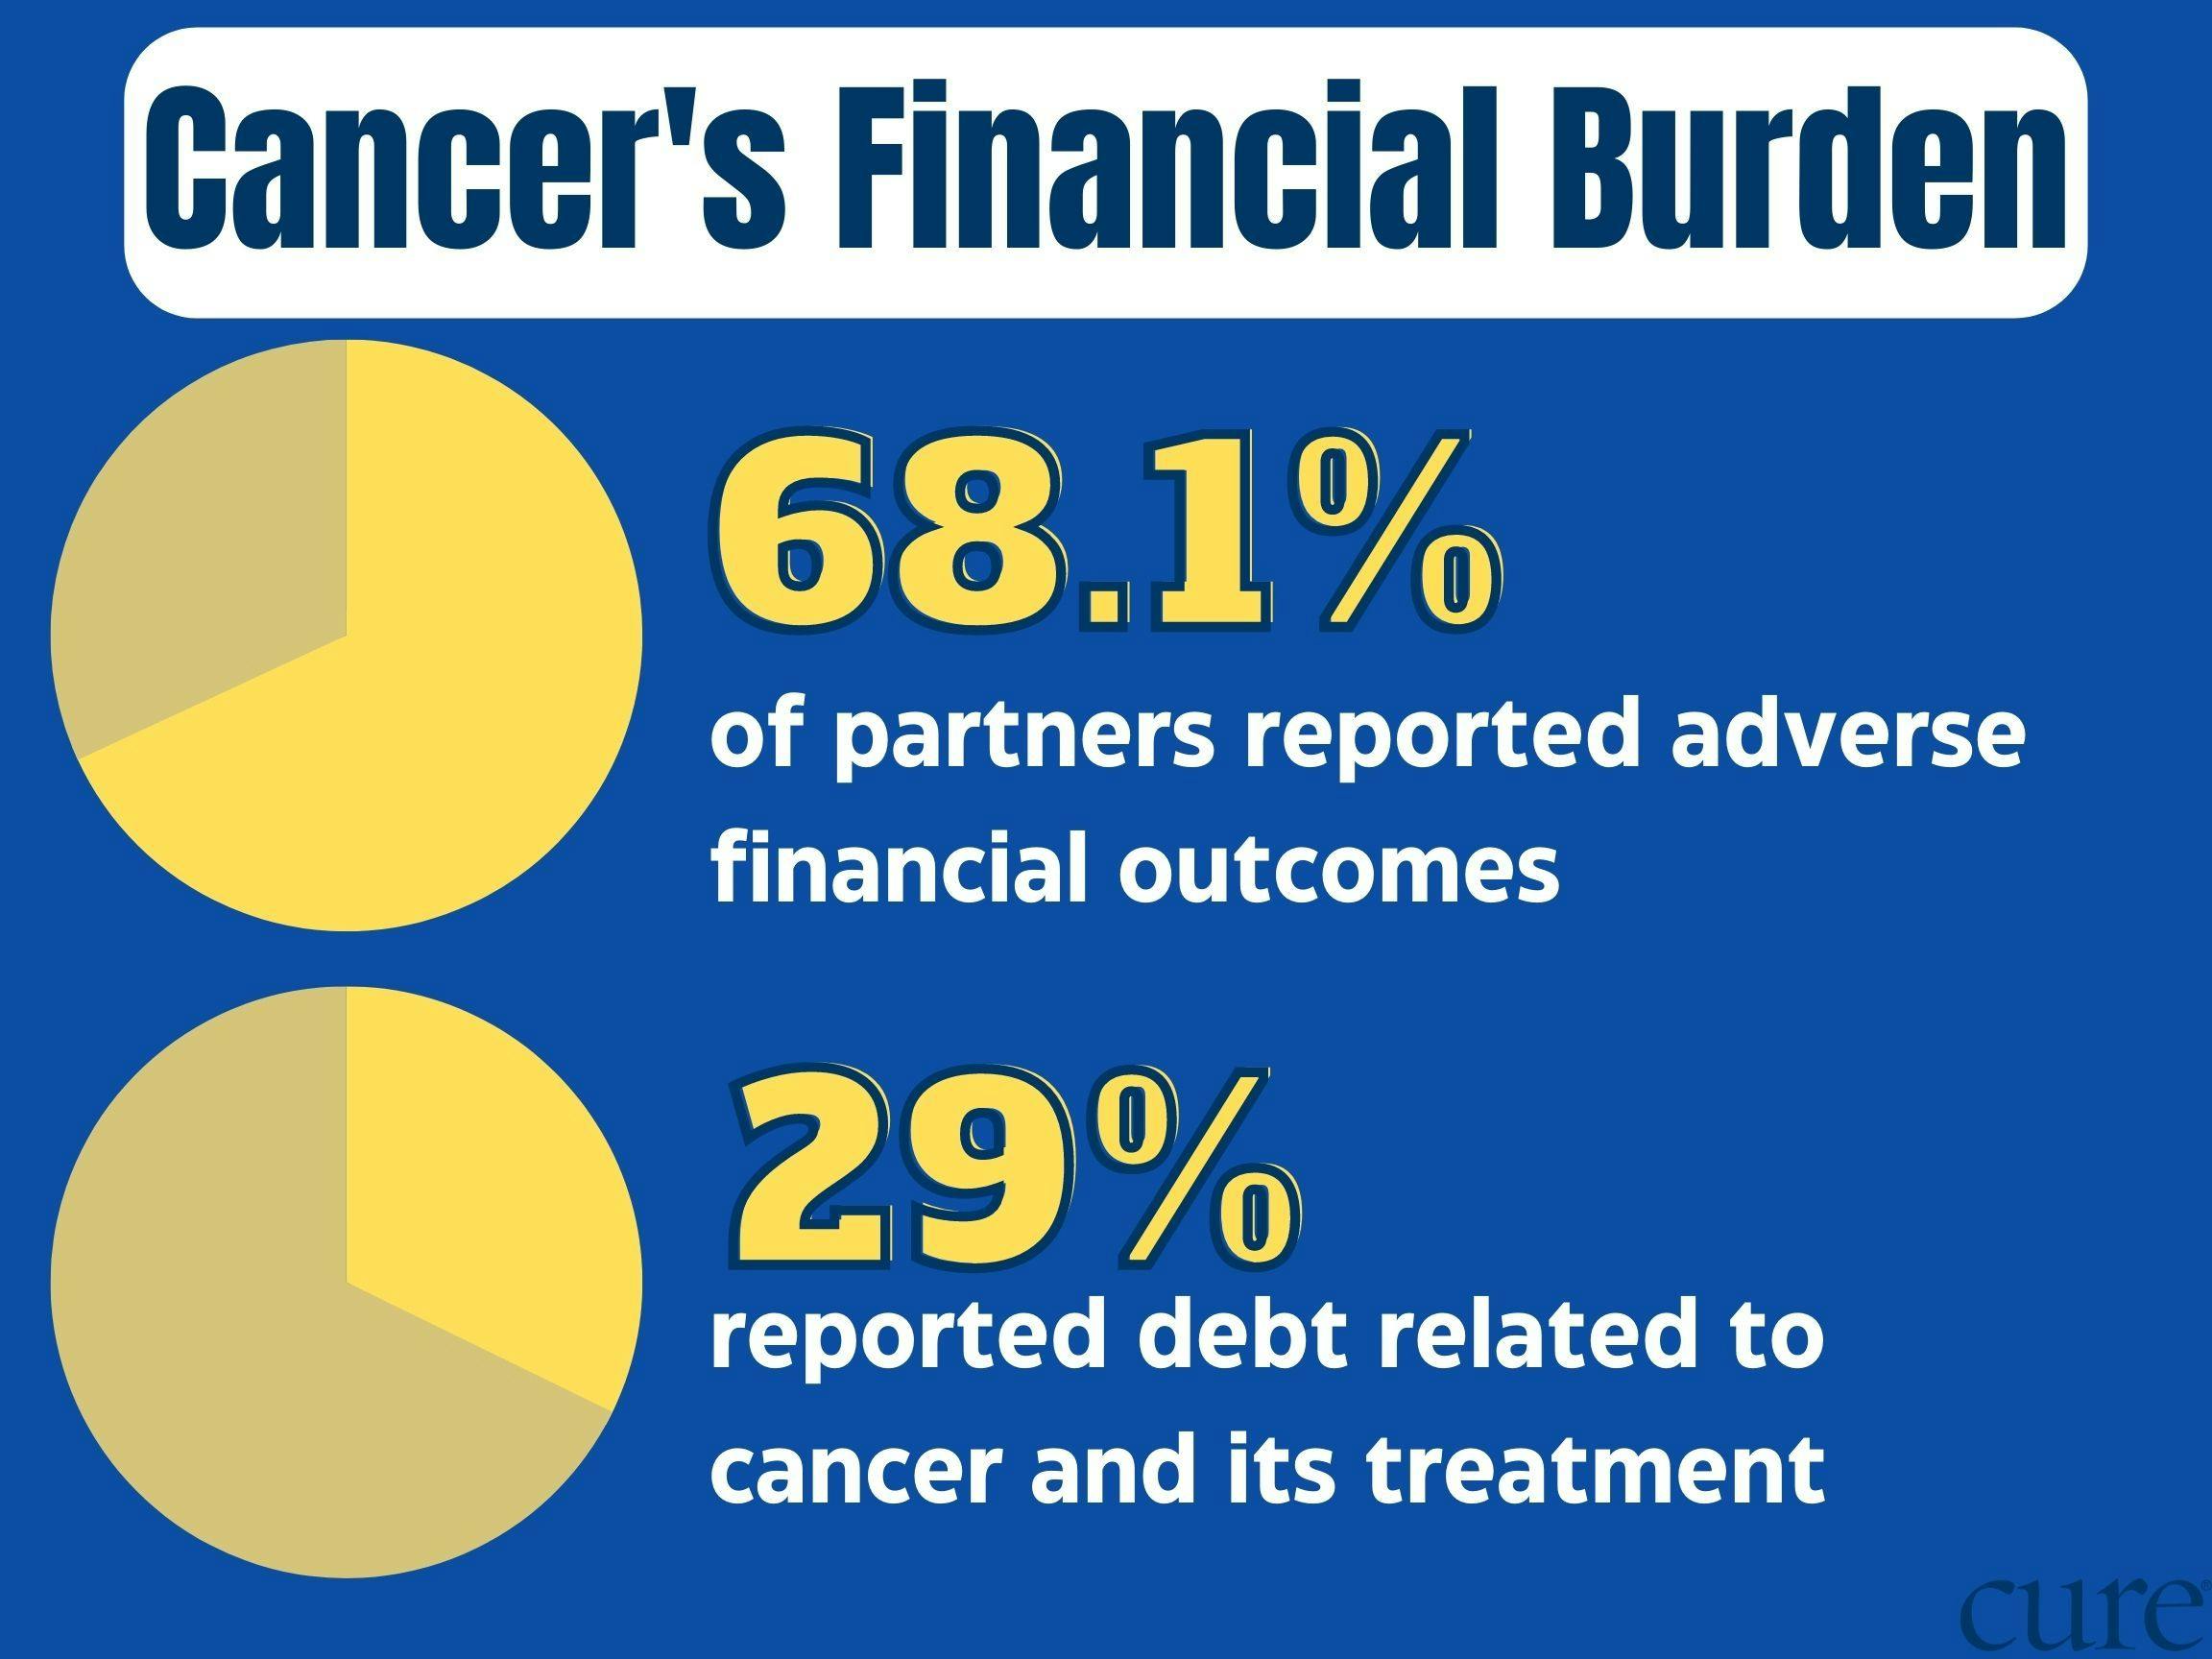 Two pie charts: one showing 68.1% of partners reported adverse financial outcomes; and the other 29% reported debt related to cancer and its treatments